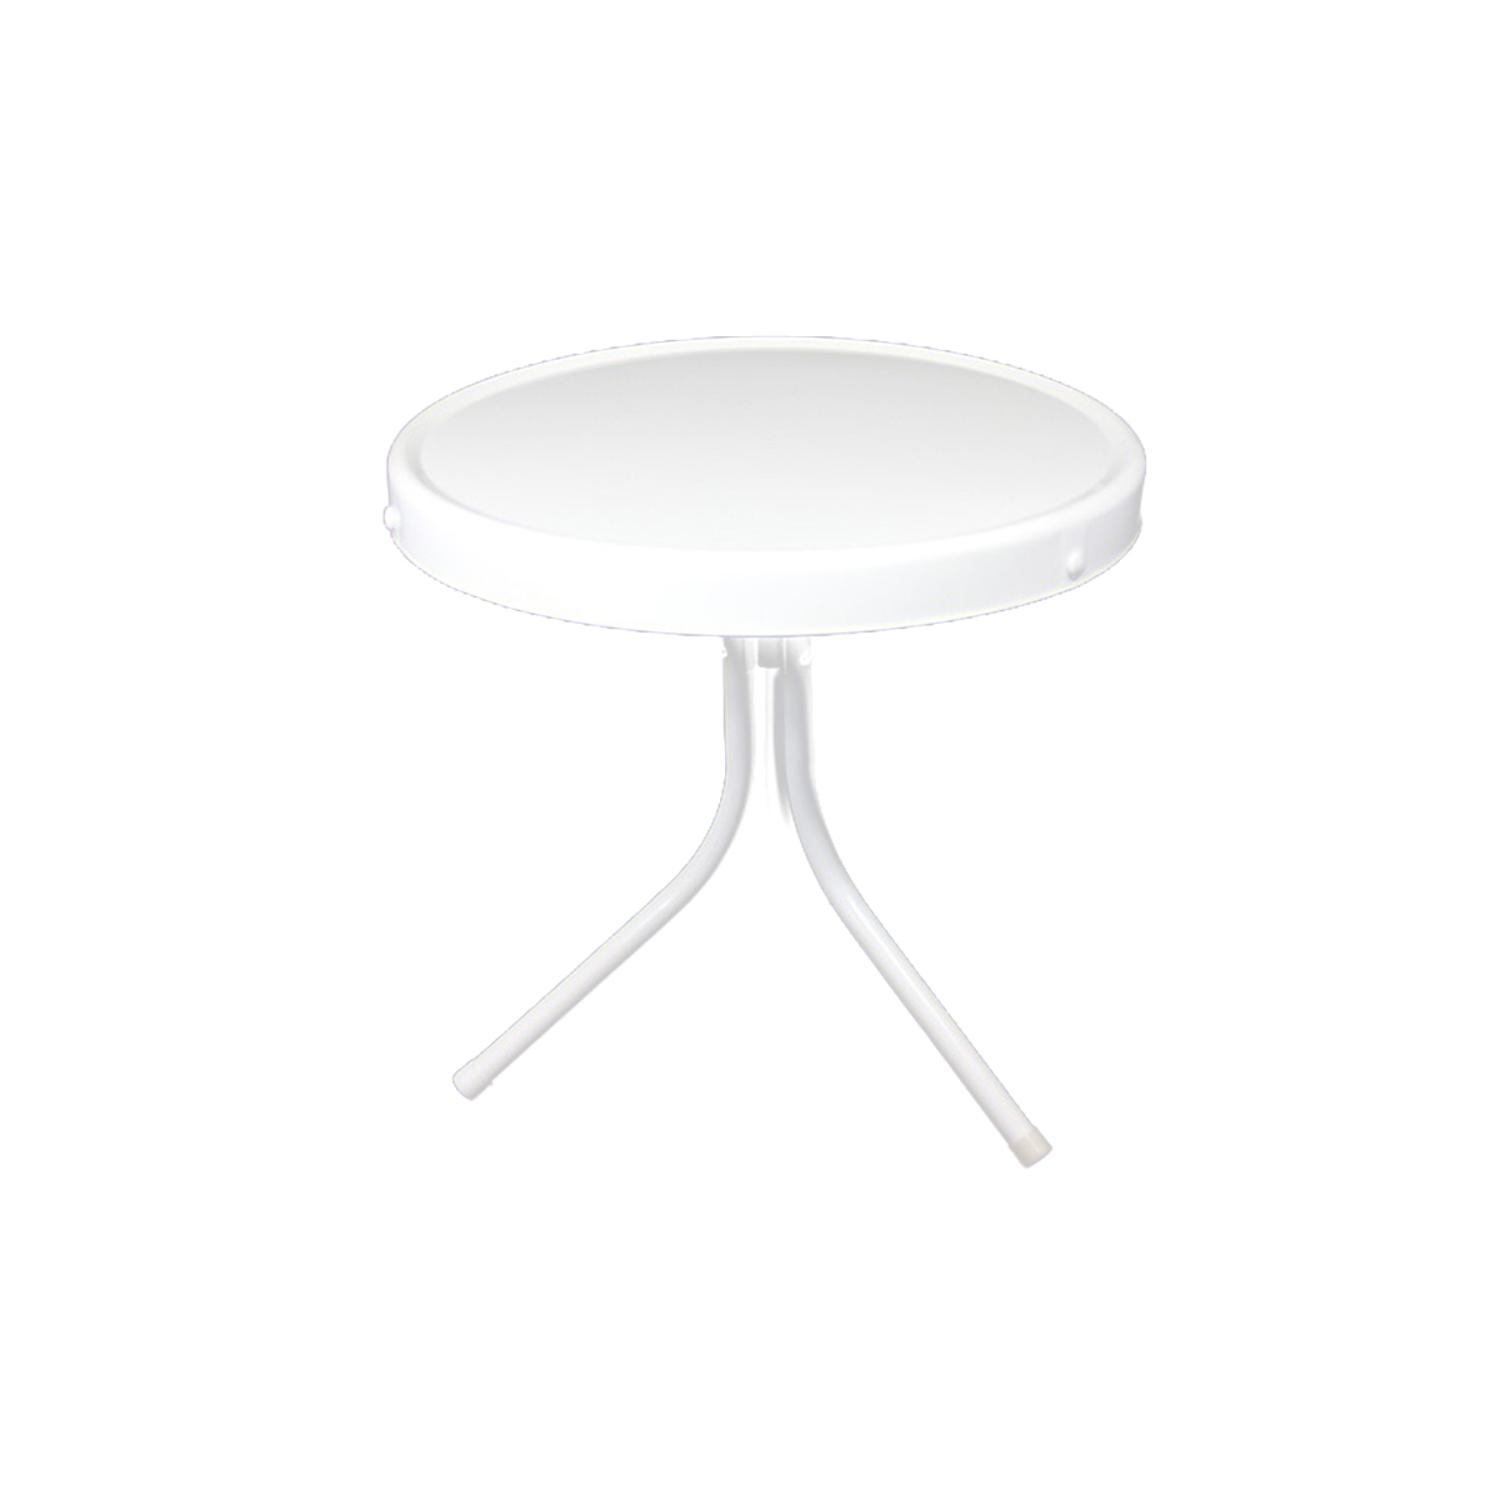 20" White Retro Metal Tulip Outdoor Side Table - image 1 of 1